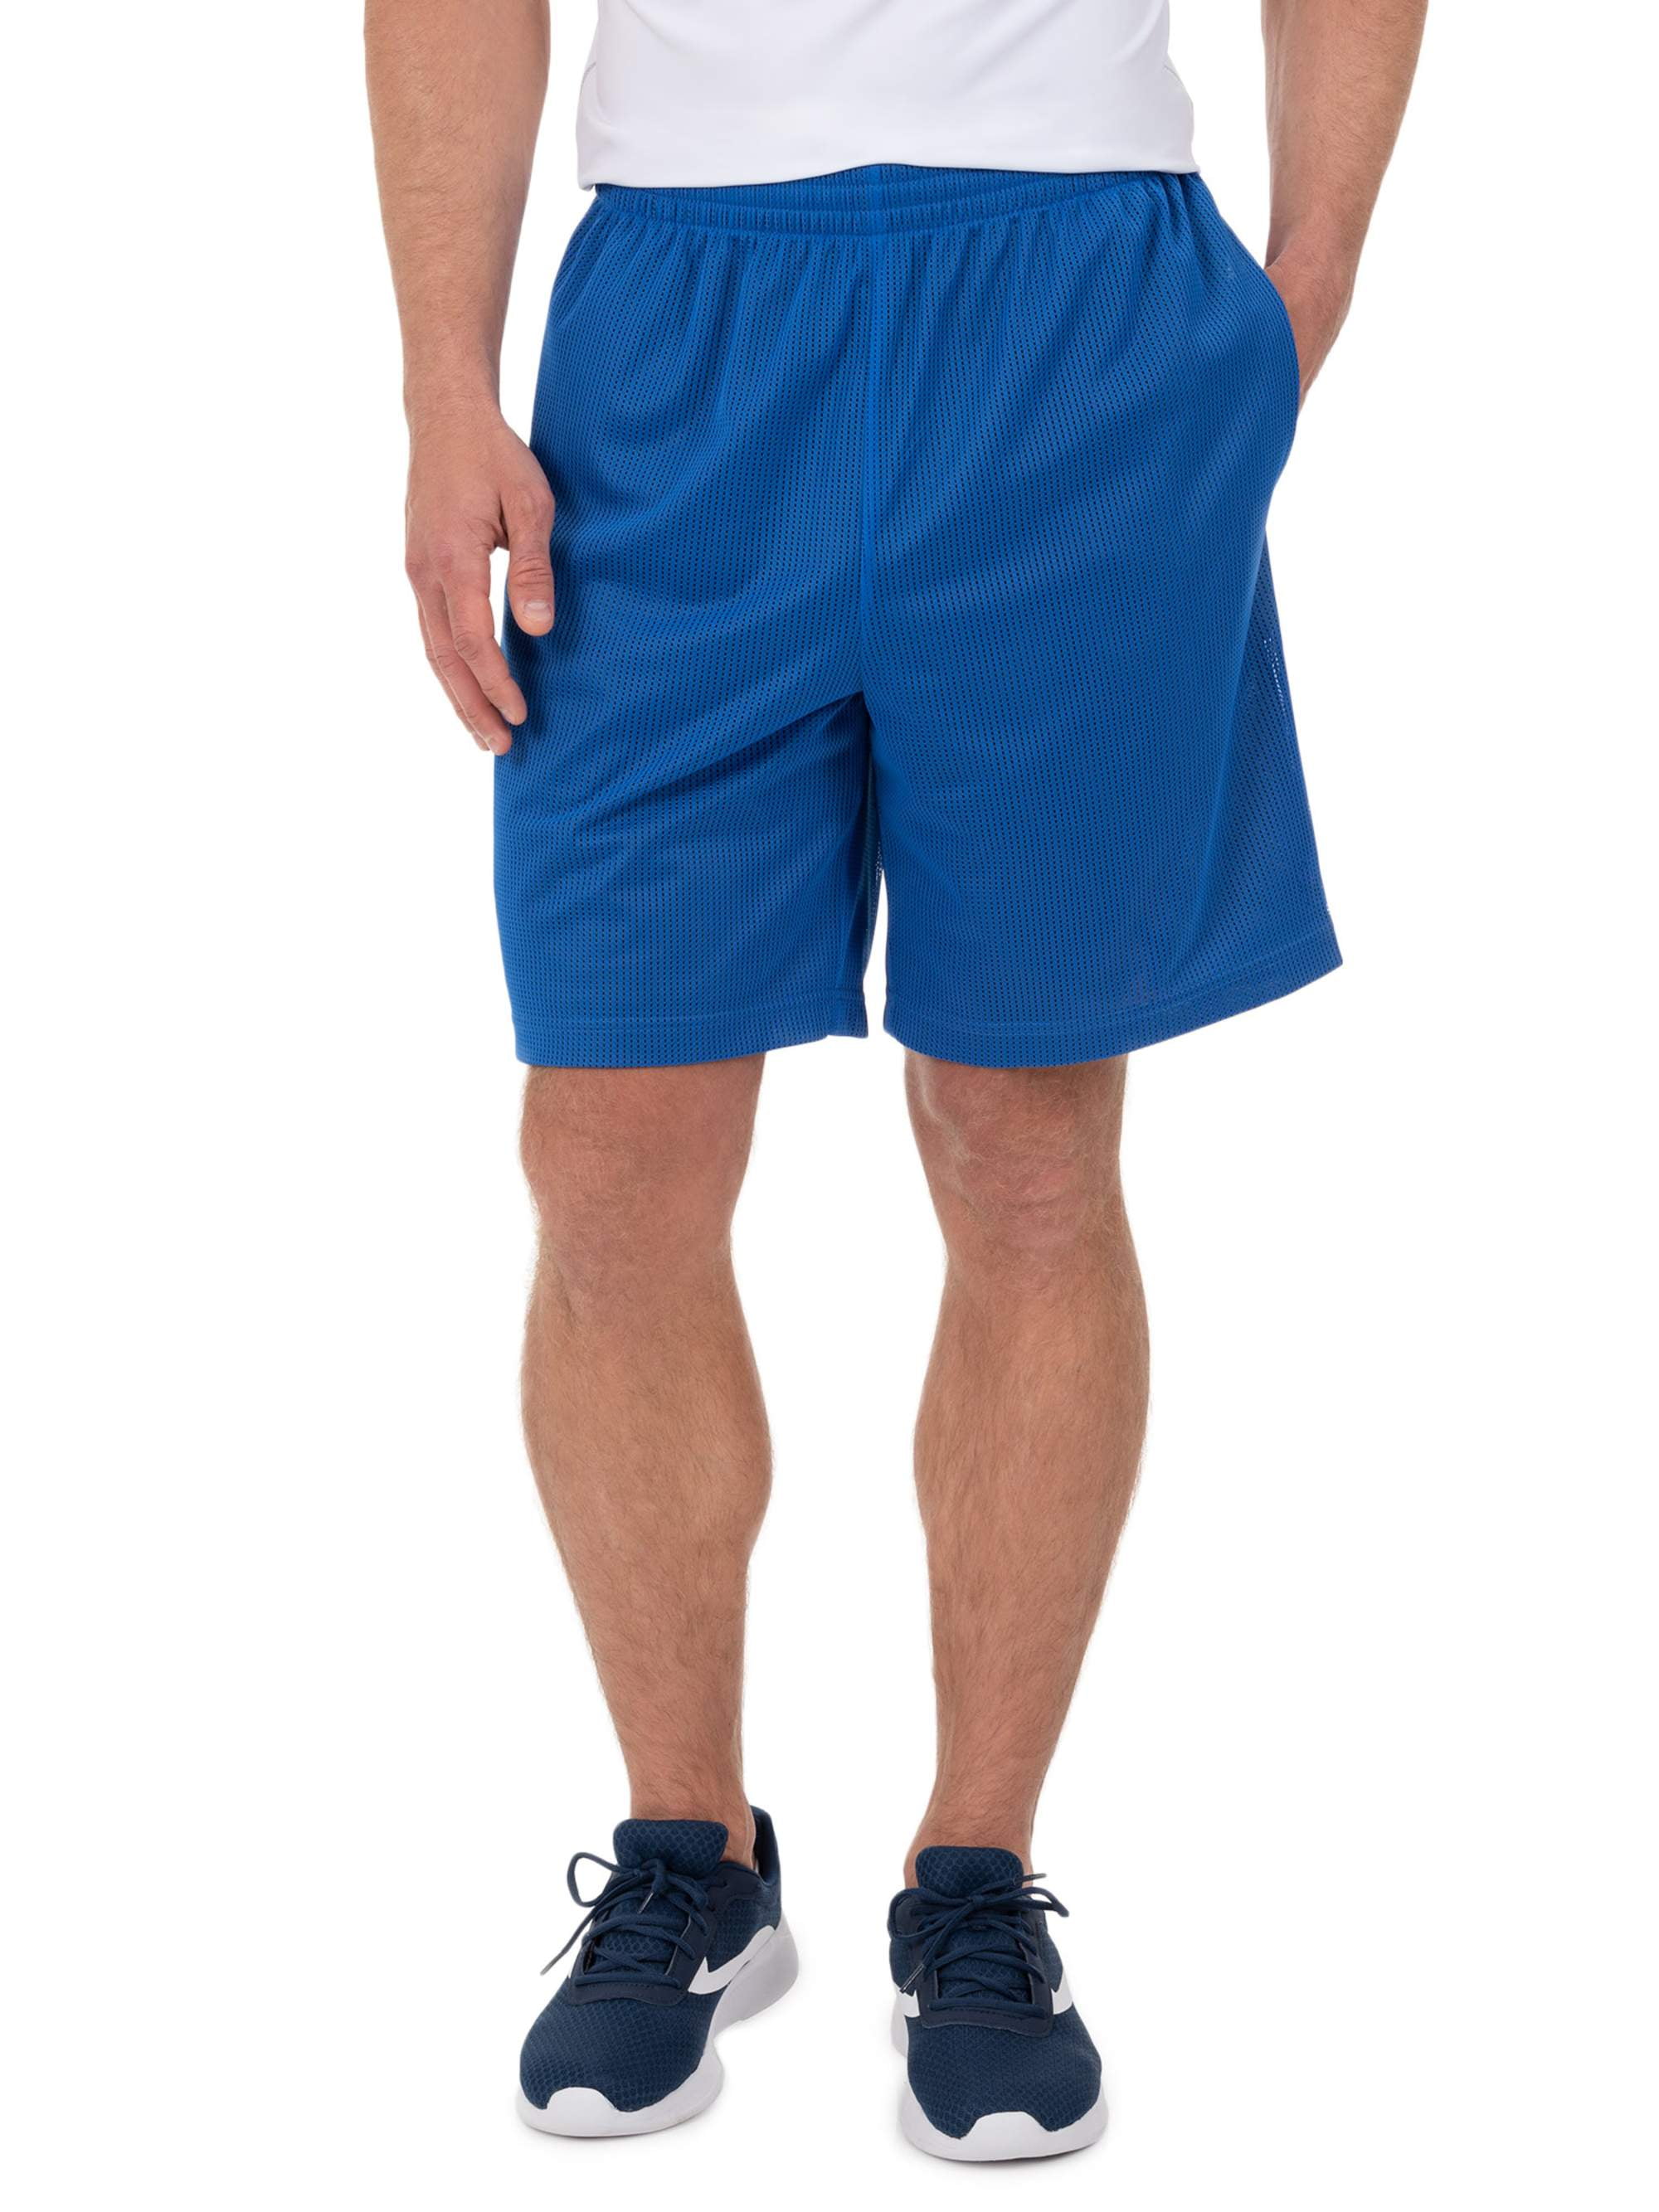 Athletic Works Men's 8 Active Performance Grid Mesh Shorts, up to